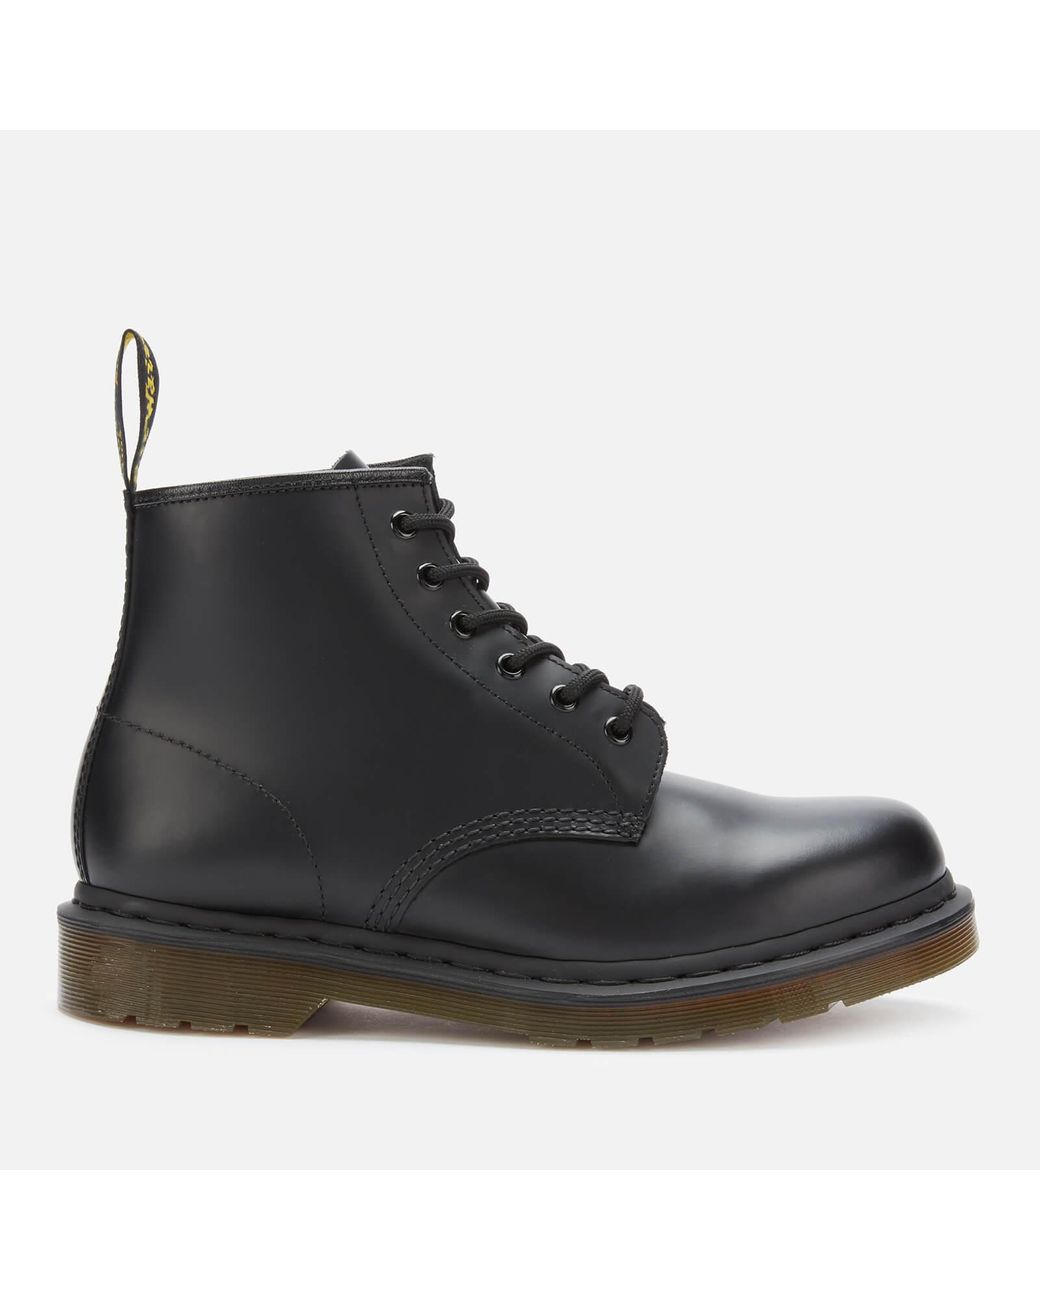 Dr. Martens 101 Smooth Leather 6-eye Boots in Black - Lyst